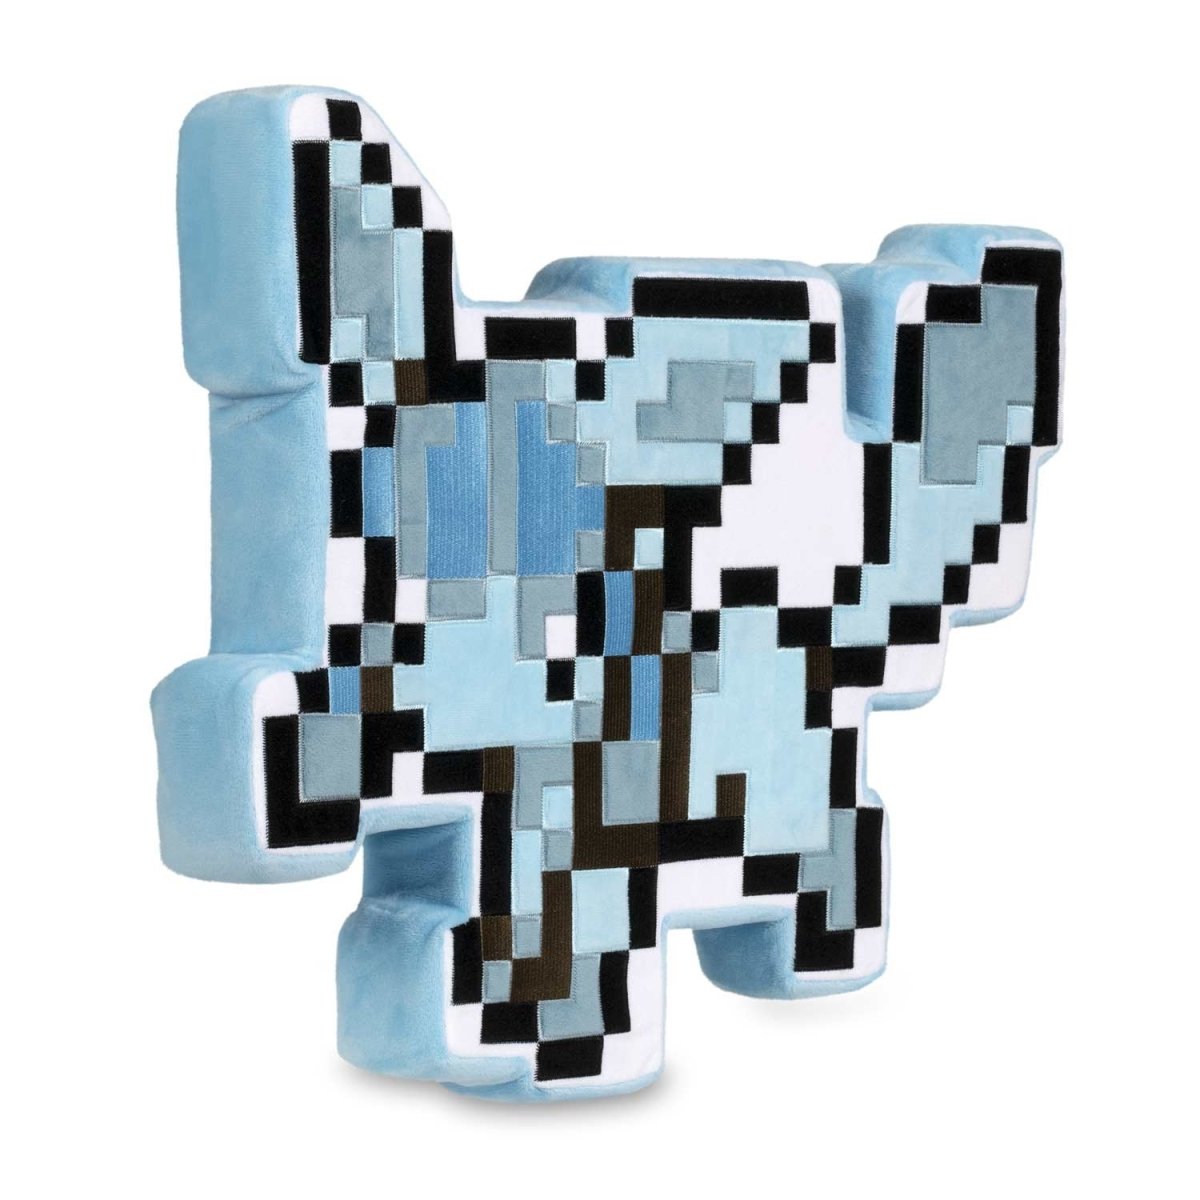 Eevee Pixel Collection - Glaceon